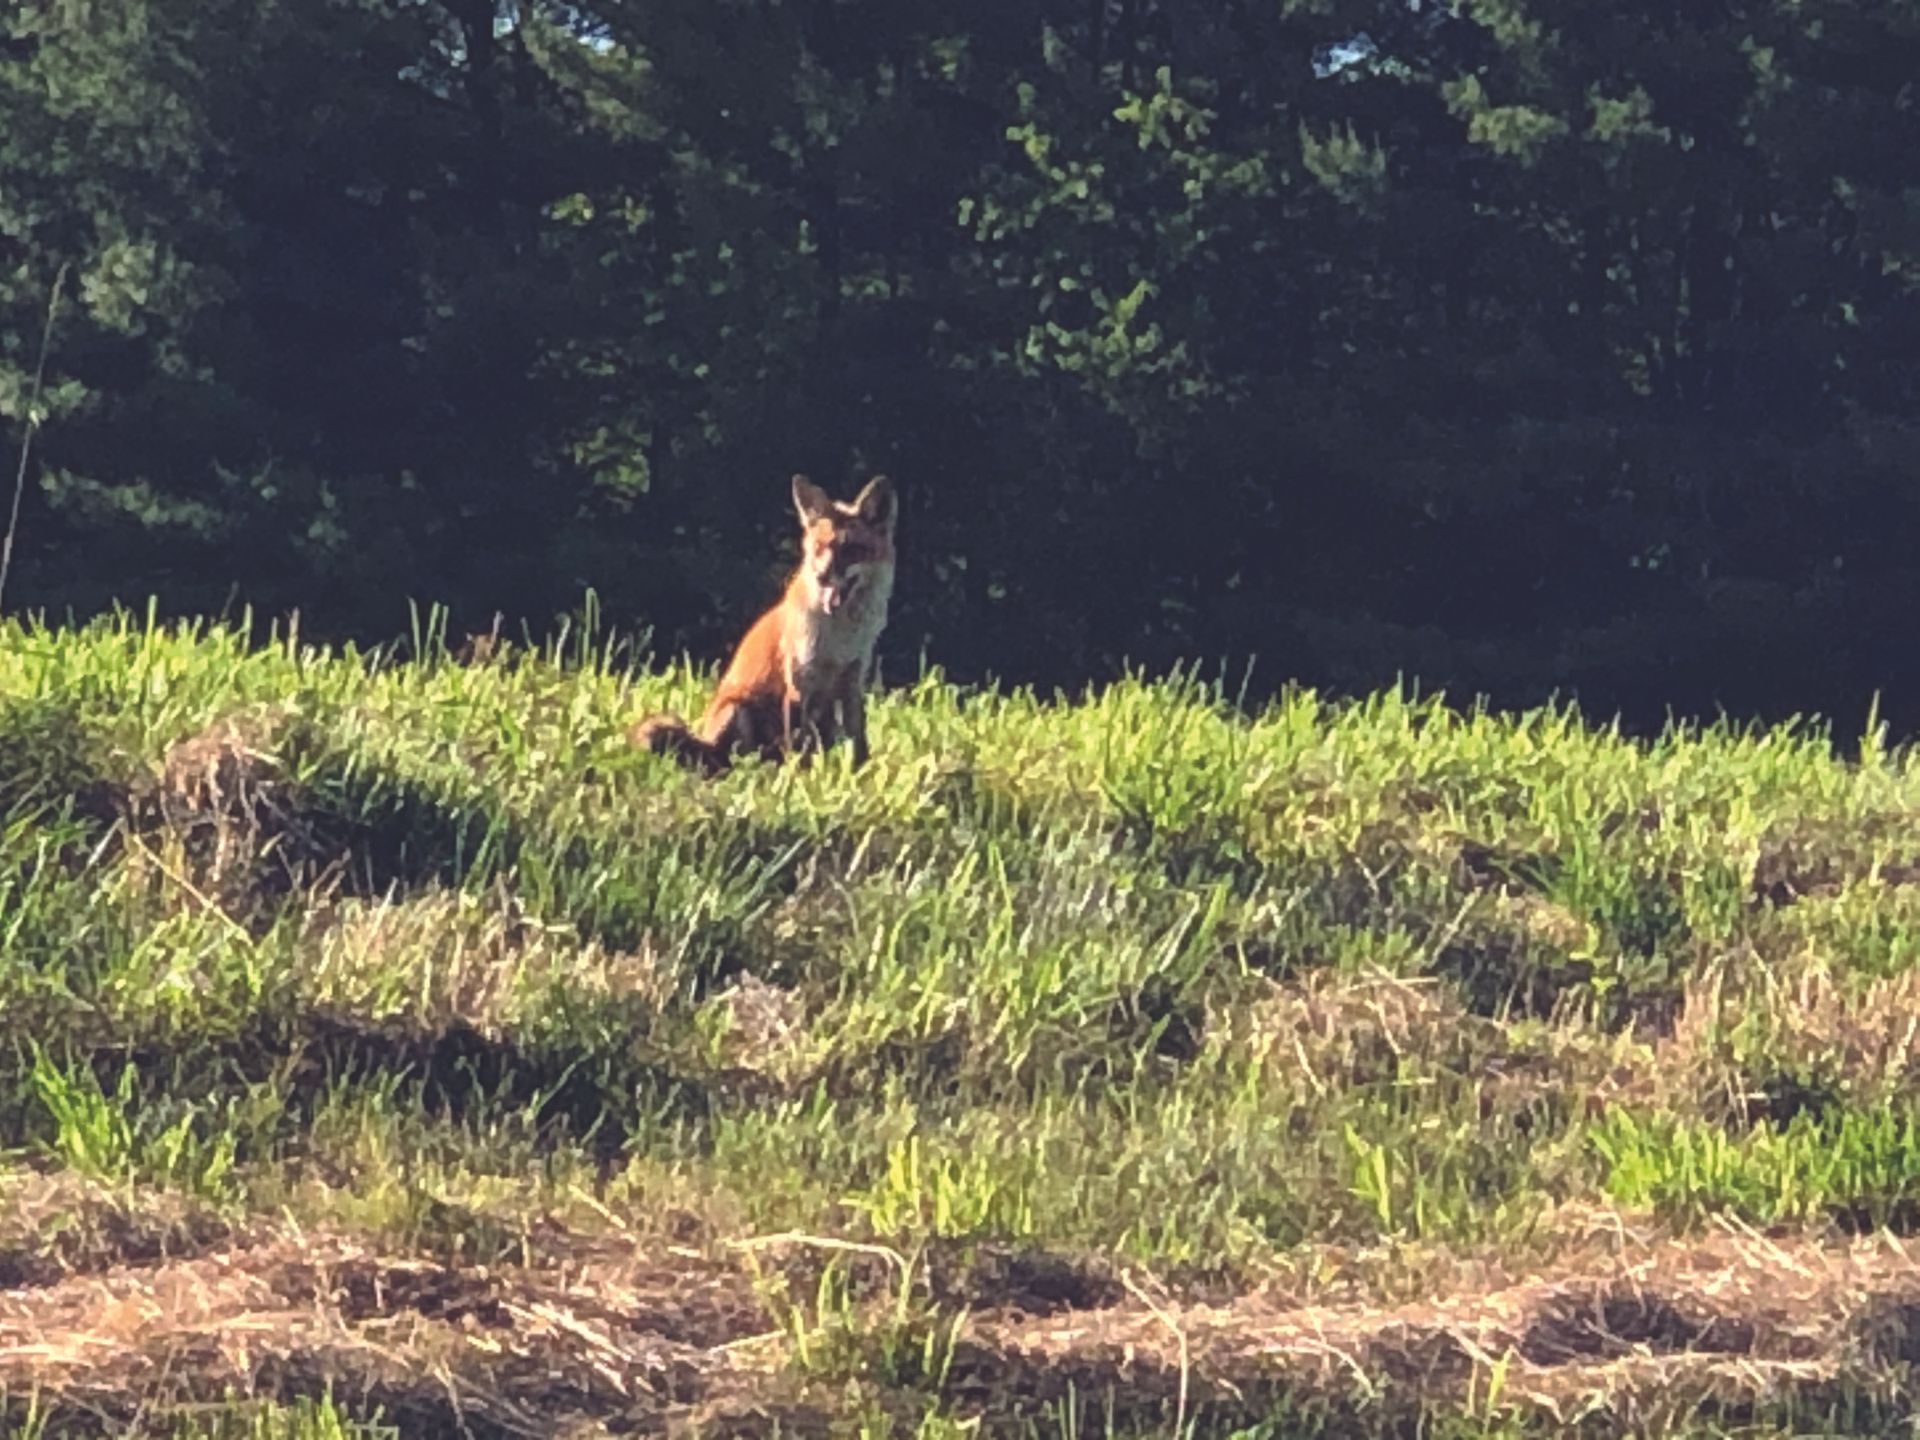 The Red Fox, a common sight around Gettysburg